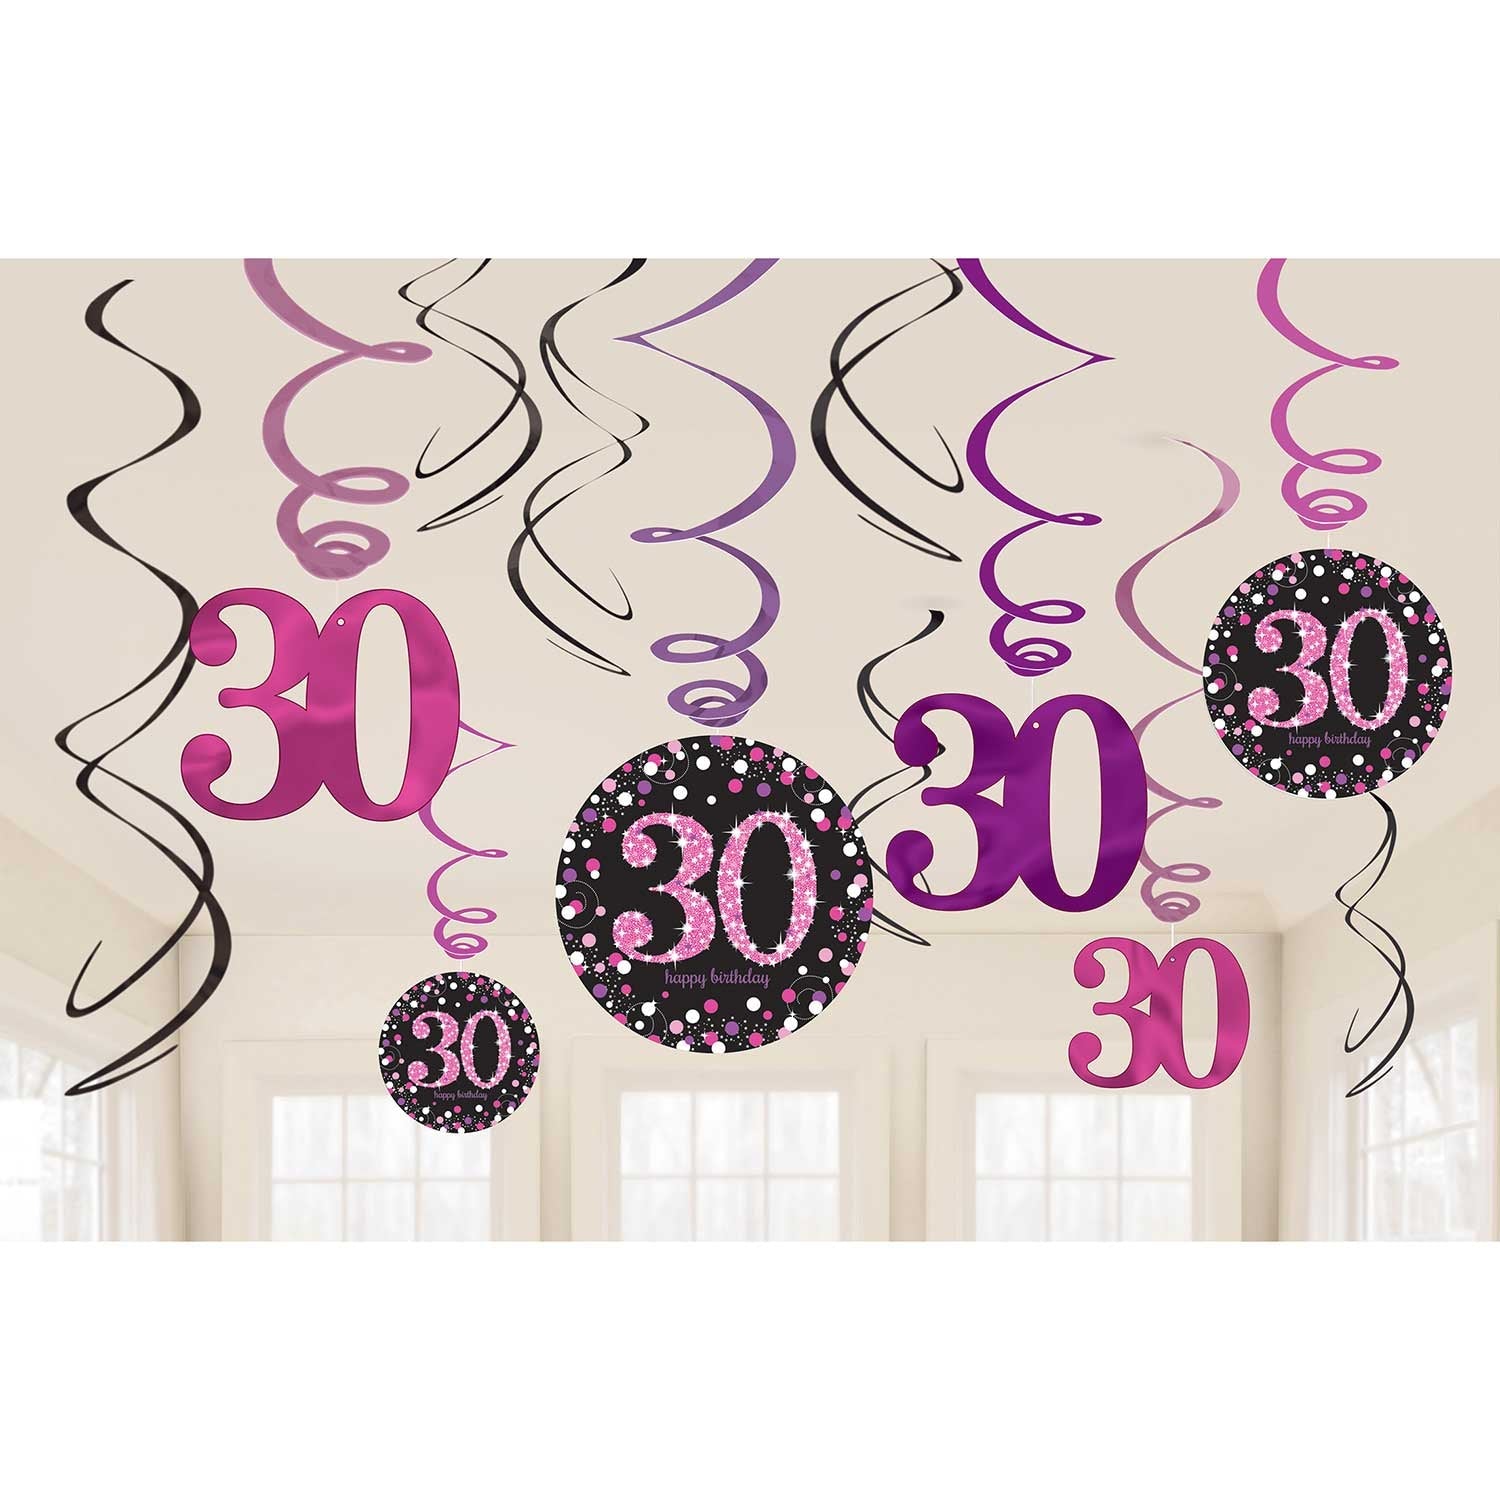 Pink Celebration 30th Swirl Decorations . Contains 6 Foil Swirls 45cm, 3 Swirls 60cm with Card Numbers, 3 Foil Swirls 60cm with Foil Numbers